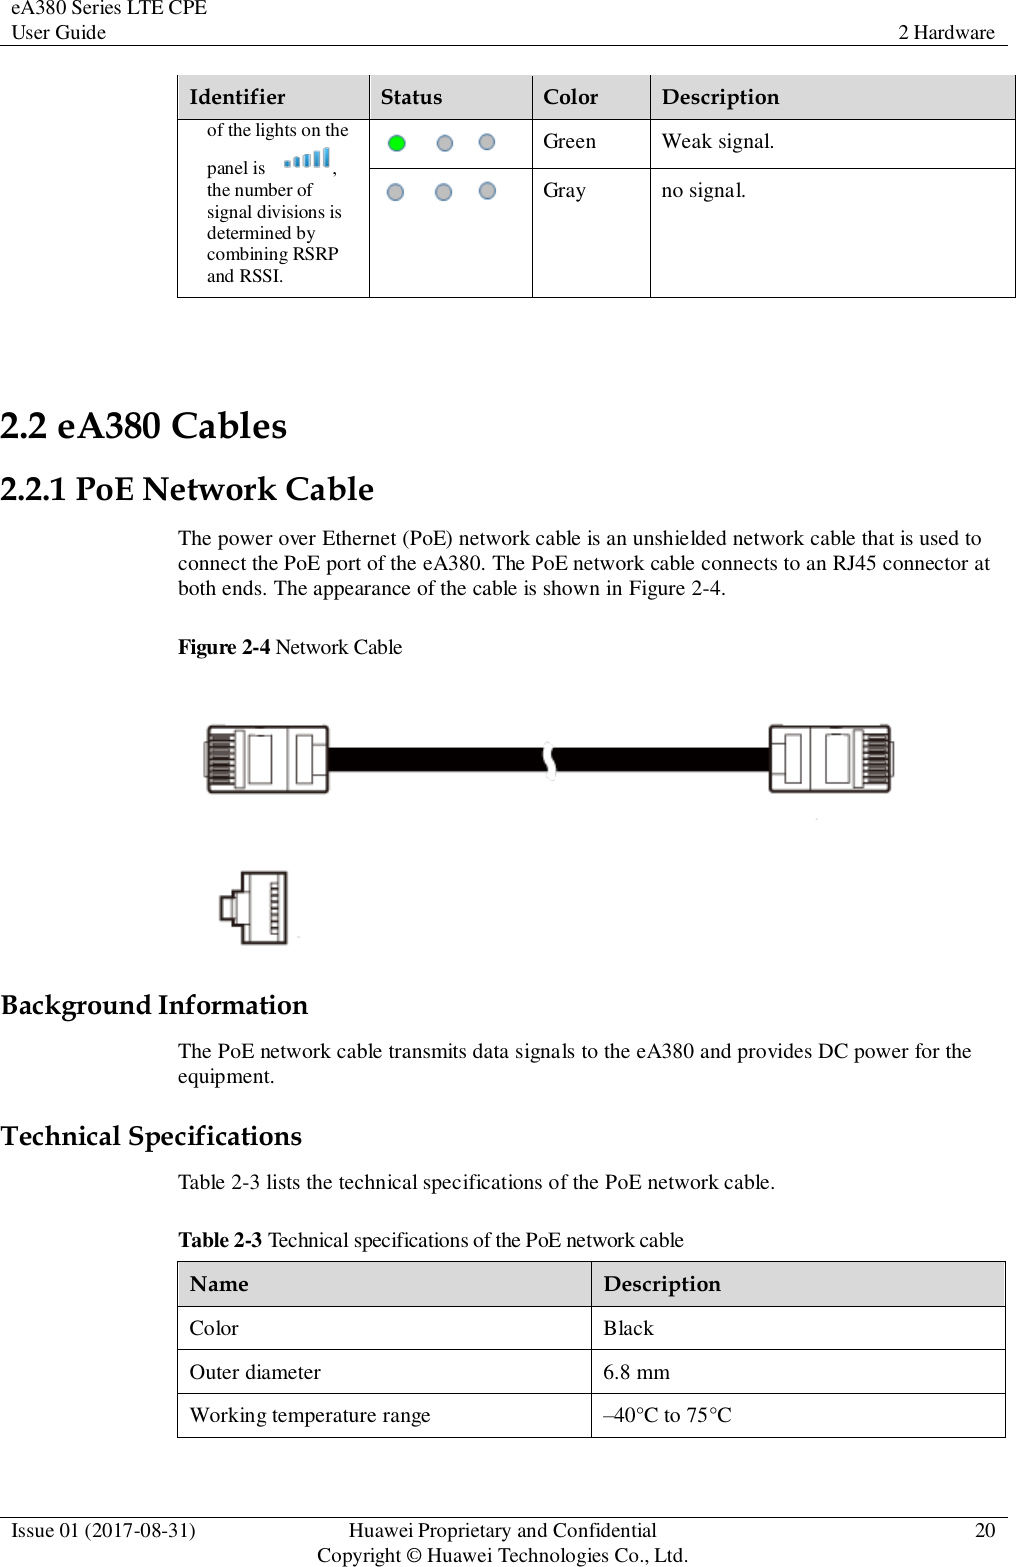 eA380 Series LTE CPE User Guide 2 Hardware  Issue 01 (2017-08-31) Huawei Proprietary and Confidential                                     Copyright © Huawei Technologies Co., Ltd. 20  Identifier Status Color Description of the lights on the panel is  , the number of signal divisions is determined by combining RSRP and RSSI.  Green Weak signal.  Gray no signal.  2.2 eA380 Cables 2.2.1 PoE Network Cable The power over Ethernet (PoE) network cable is an unshielded network cable that is used to connect the PoE port of the eA380. The PoE network cable connects to an RJ45 connector at both ends. The appearance of the cable is shown in Figure 2-4. Figure 2-4 Network Cable  Background Information The PoE network cable transmits data signals to the eA380 and provides DC power for the equipment. Technical Specifications Table 2-3 lists the technical specifications of the PoE network cable. Table 2-3 Technical specifications of the PoE network cable Name Description Color Black Outer diameter 6.8 mm Working temperature range –40°C to 75°C 